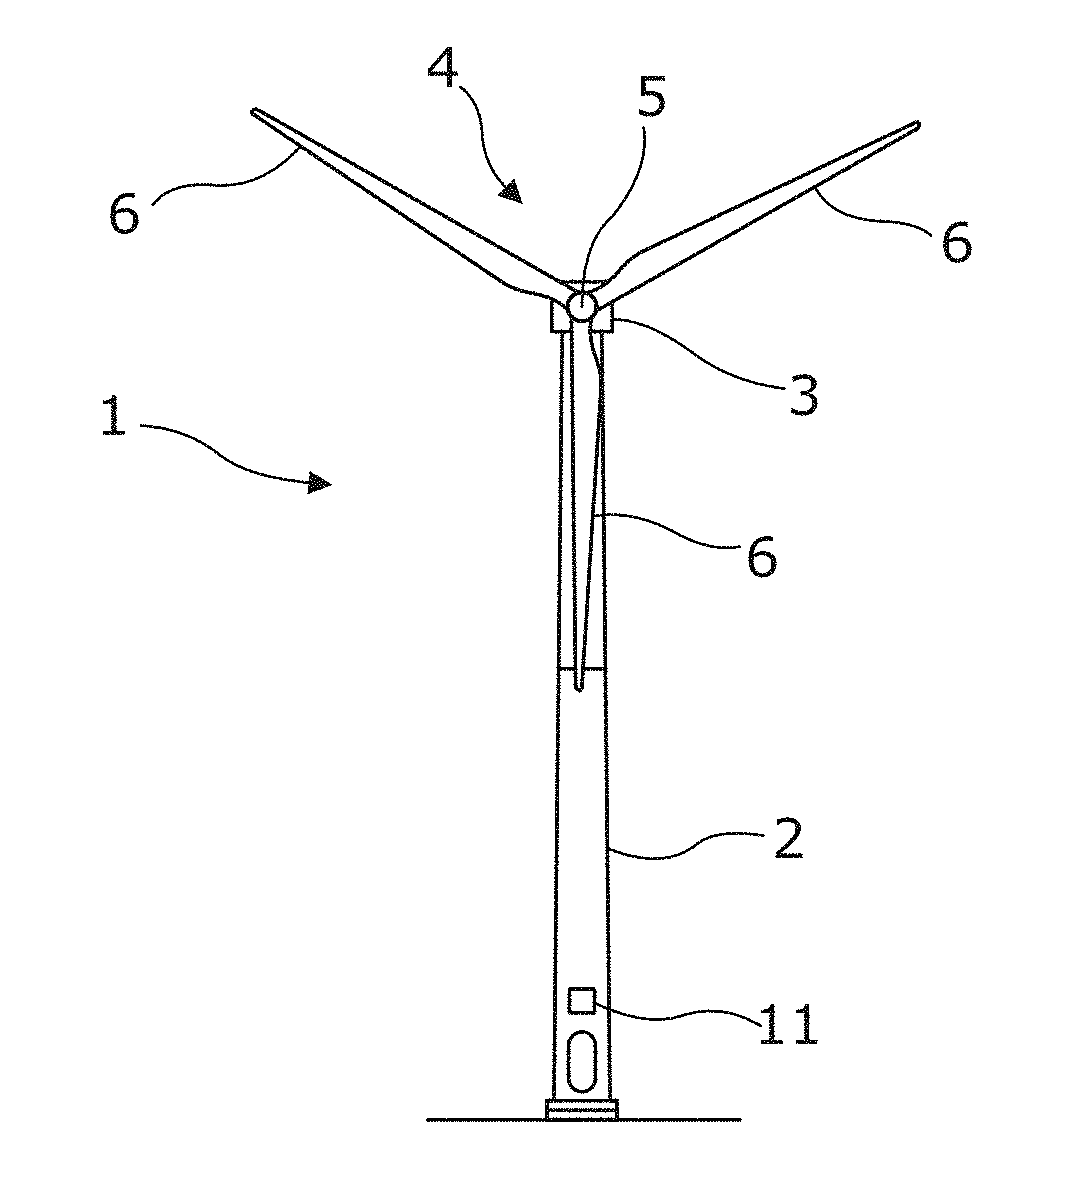 Control system for a wind turbine